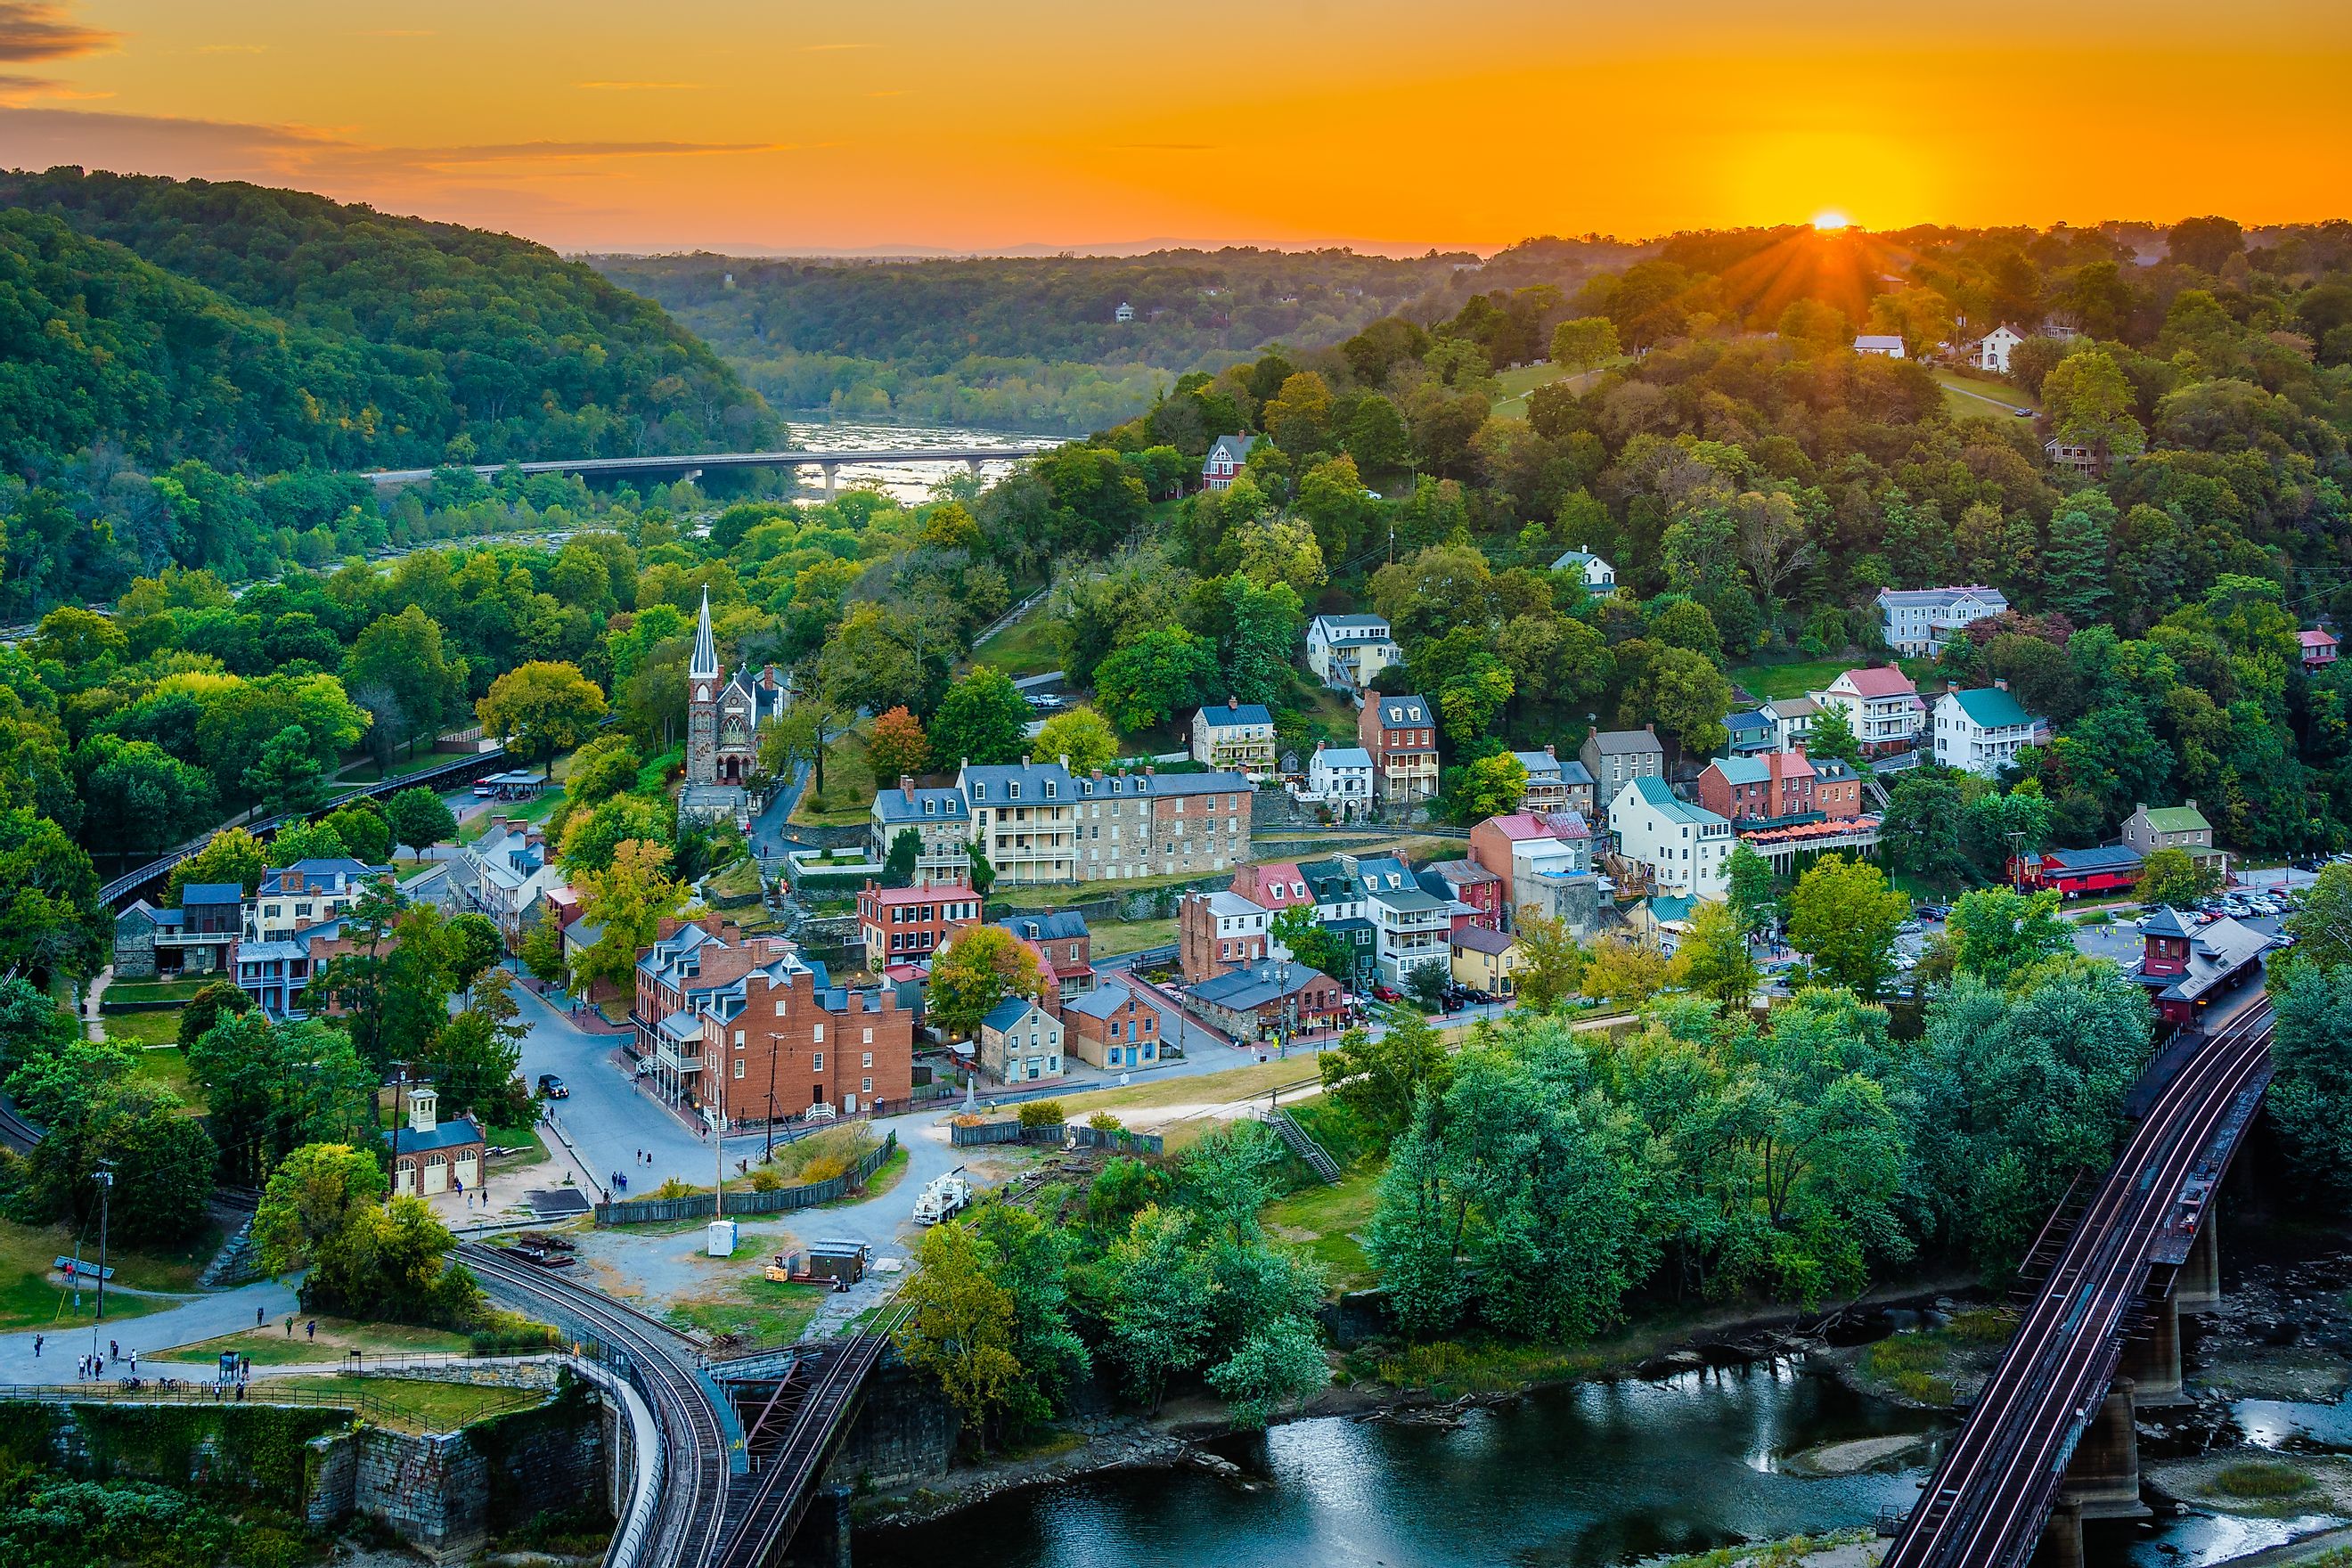 The beautiful town of Harper's Ferry at sunrise.